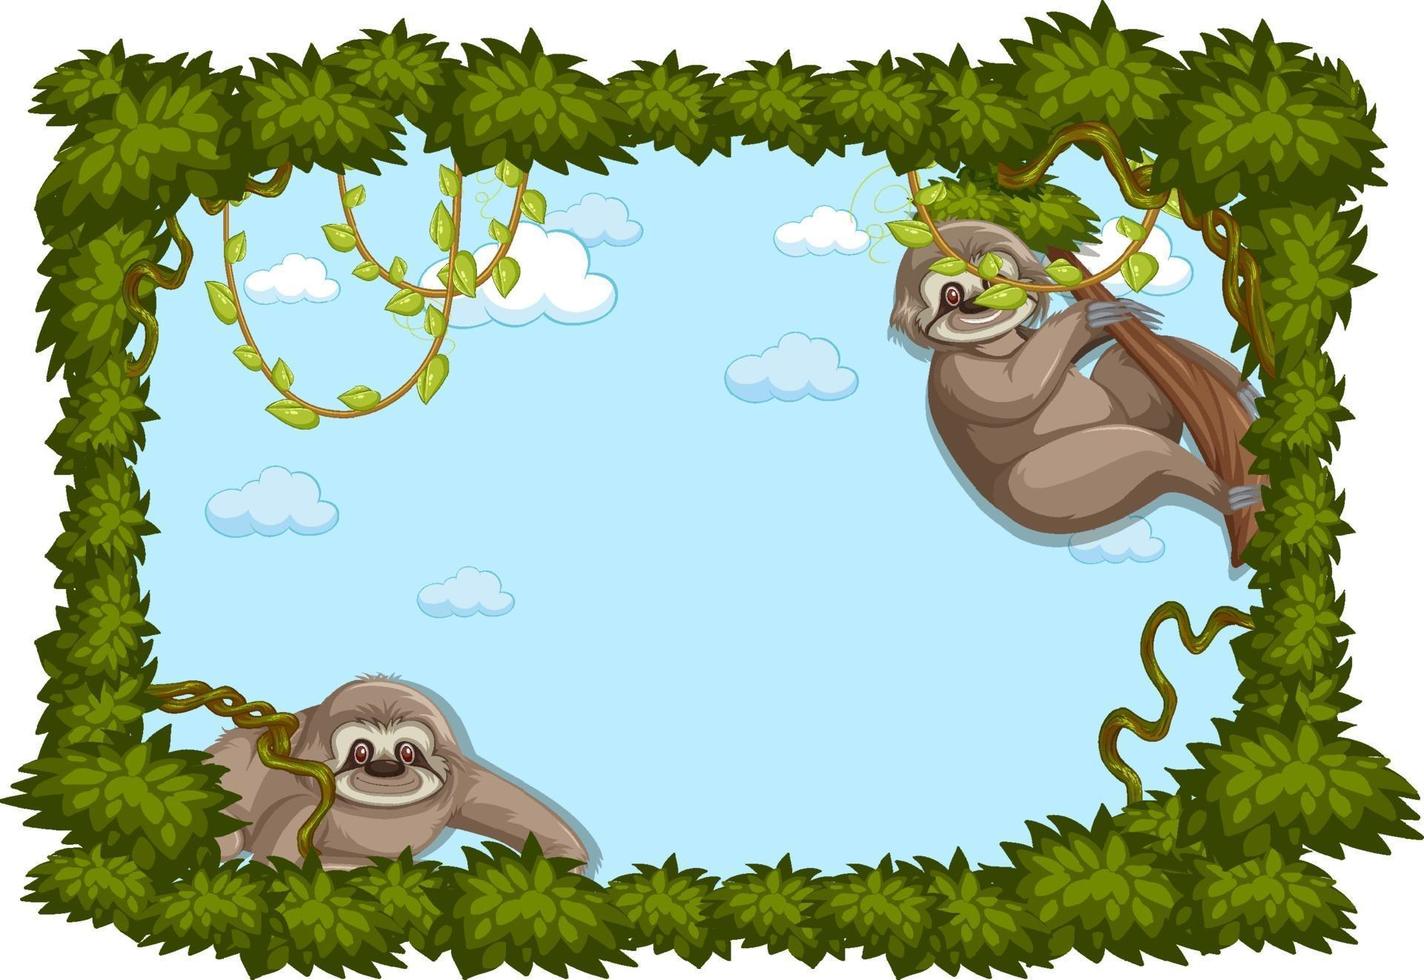 Empty banner with leaves frame and sloth cartoon character vector